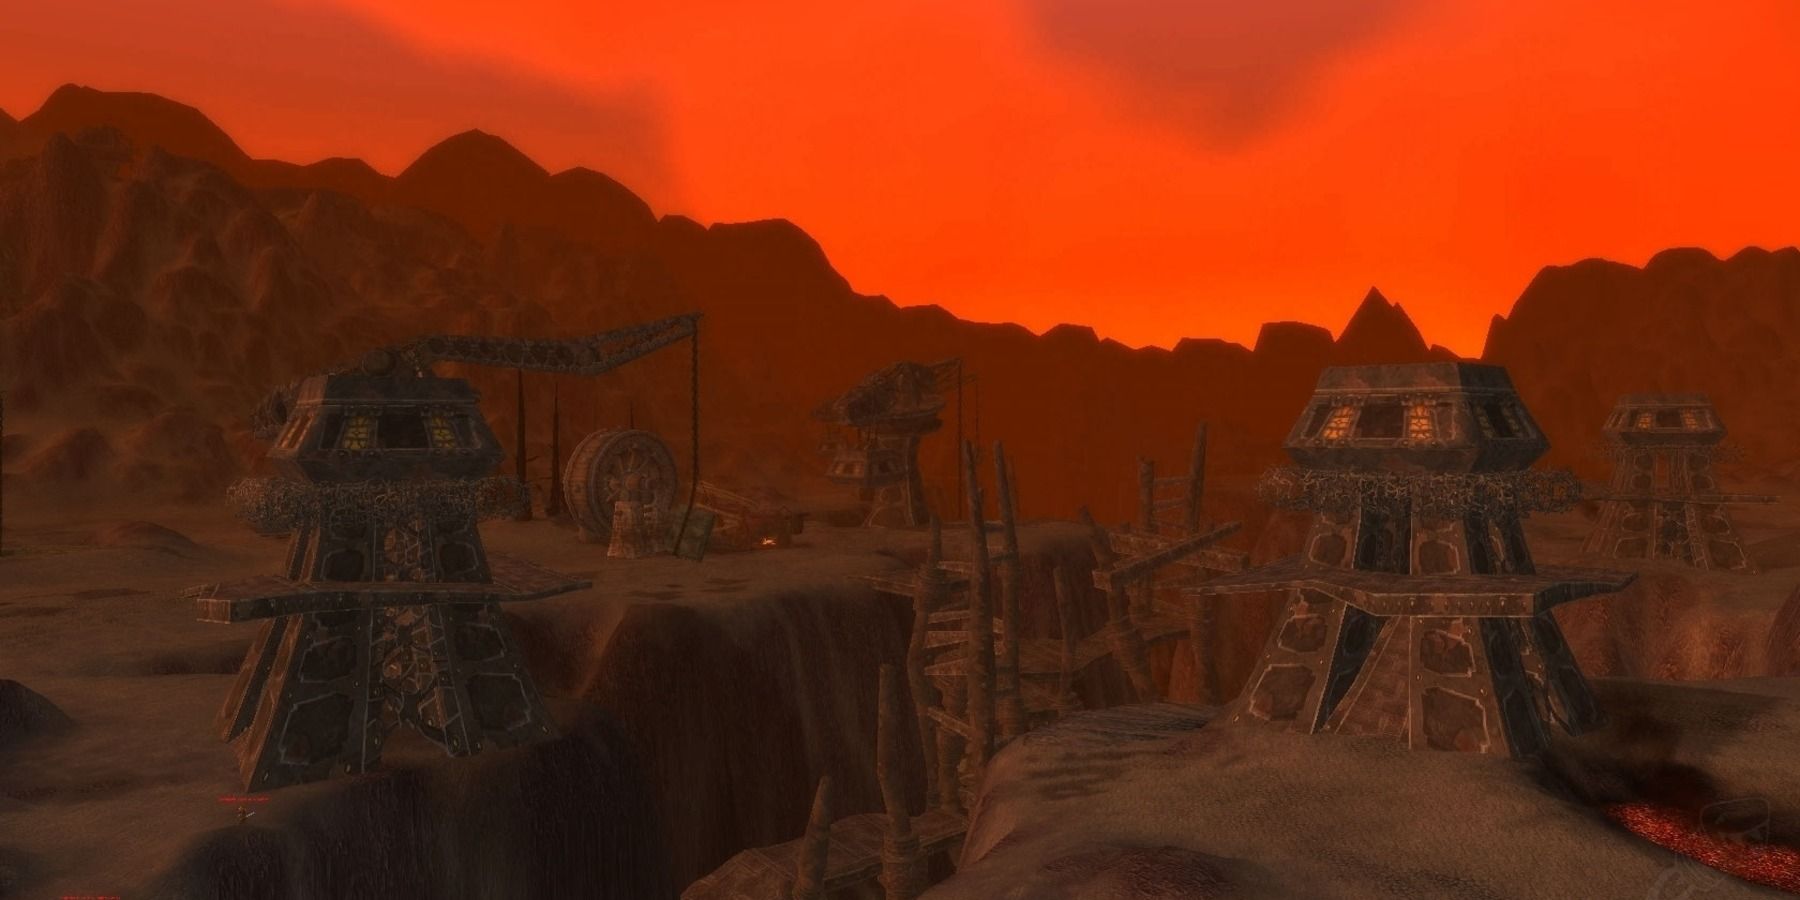 Classic world of warcraft, view of Searing Gorge landscape ith distant mountains and dwarven towers.